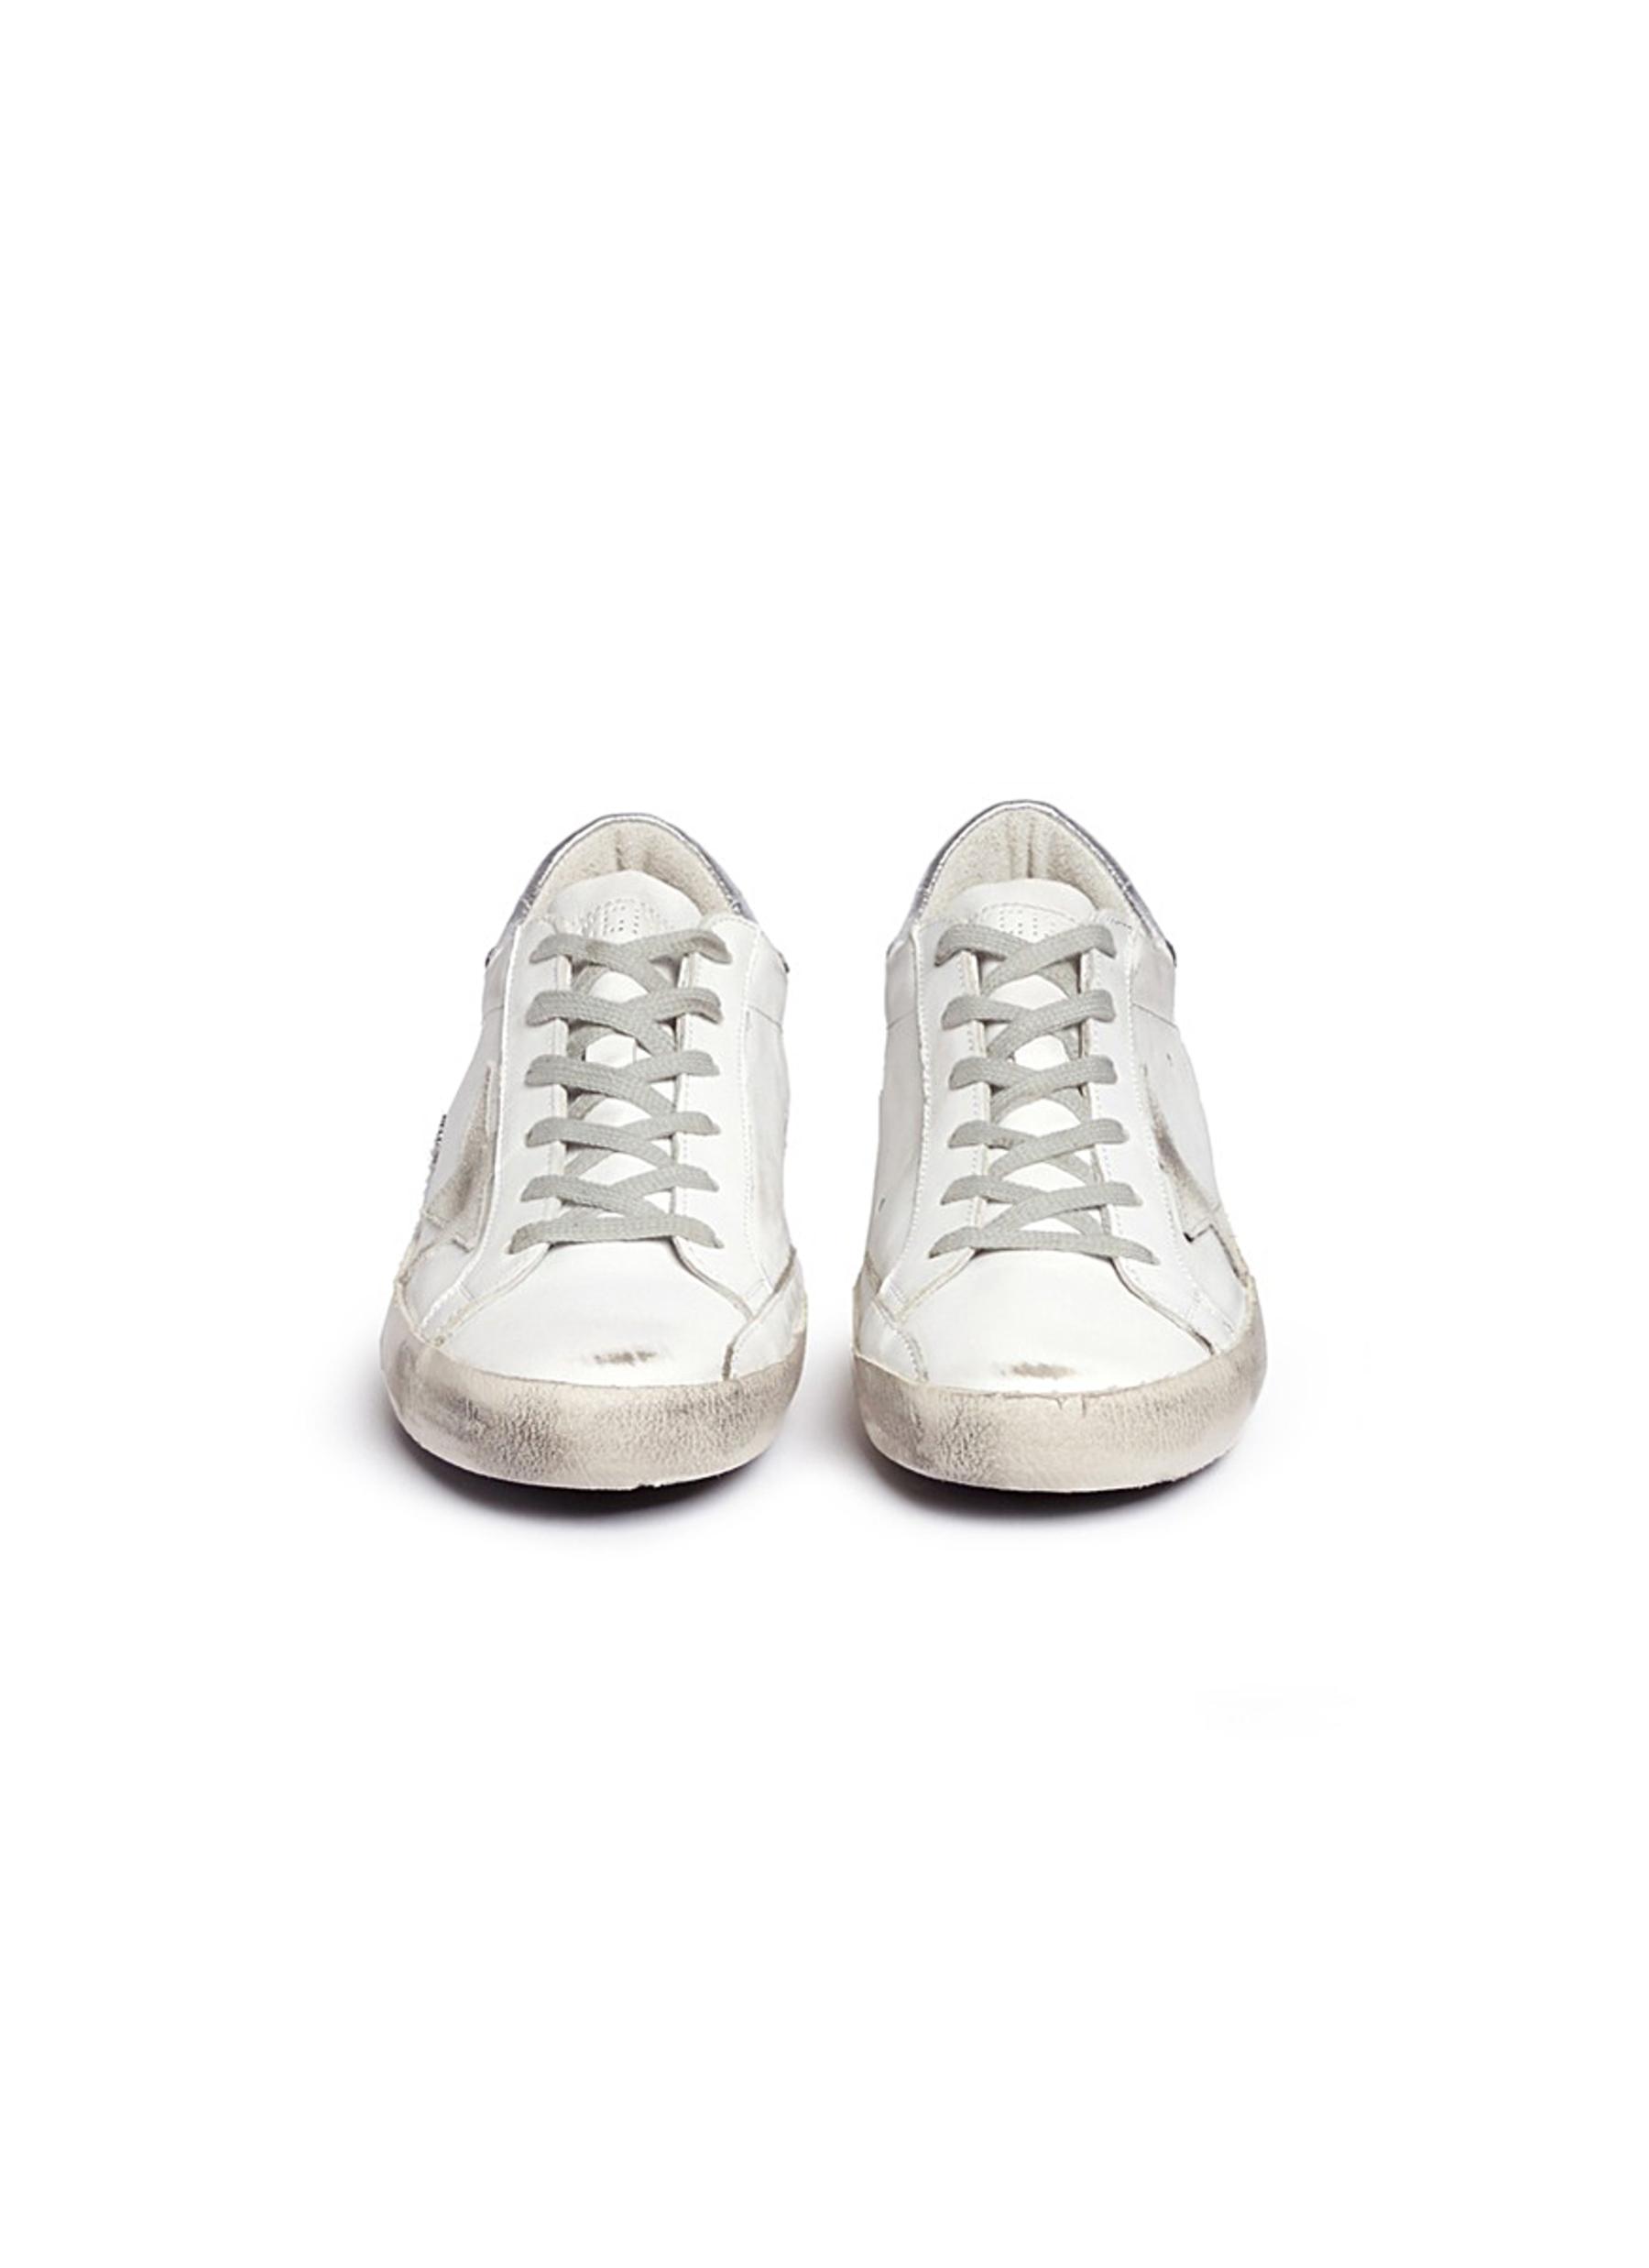 GOLDEN GOOSE Distressed Leather Low-Top Sneaker, White/Silver | ModeSens